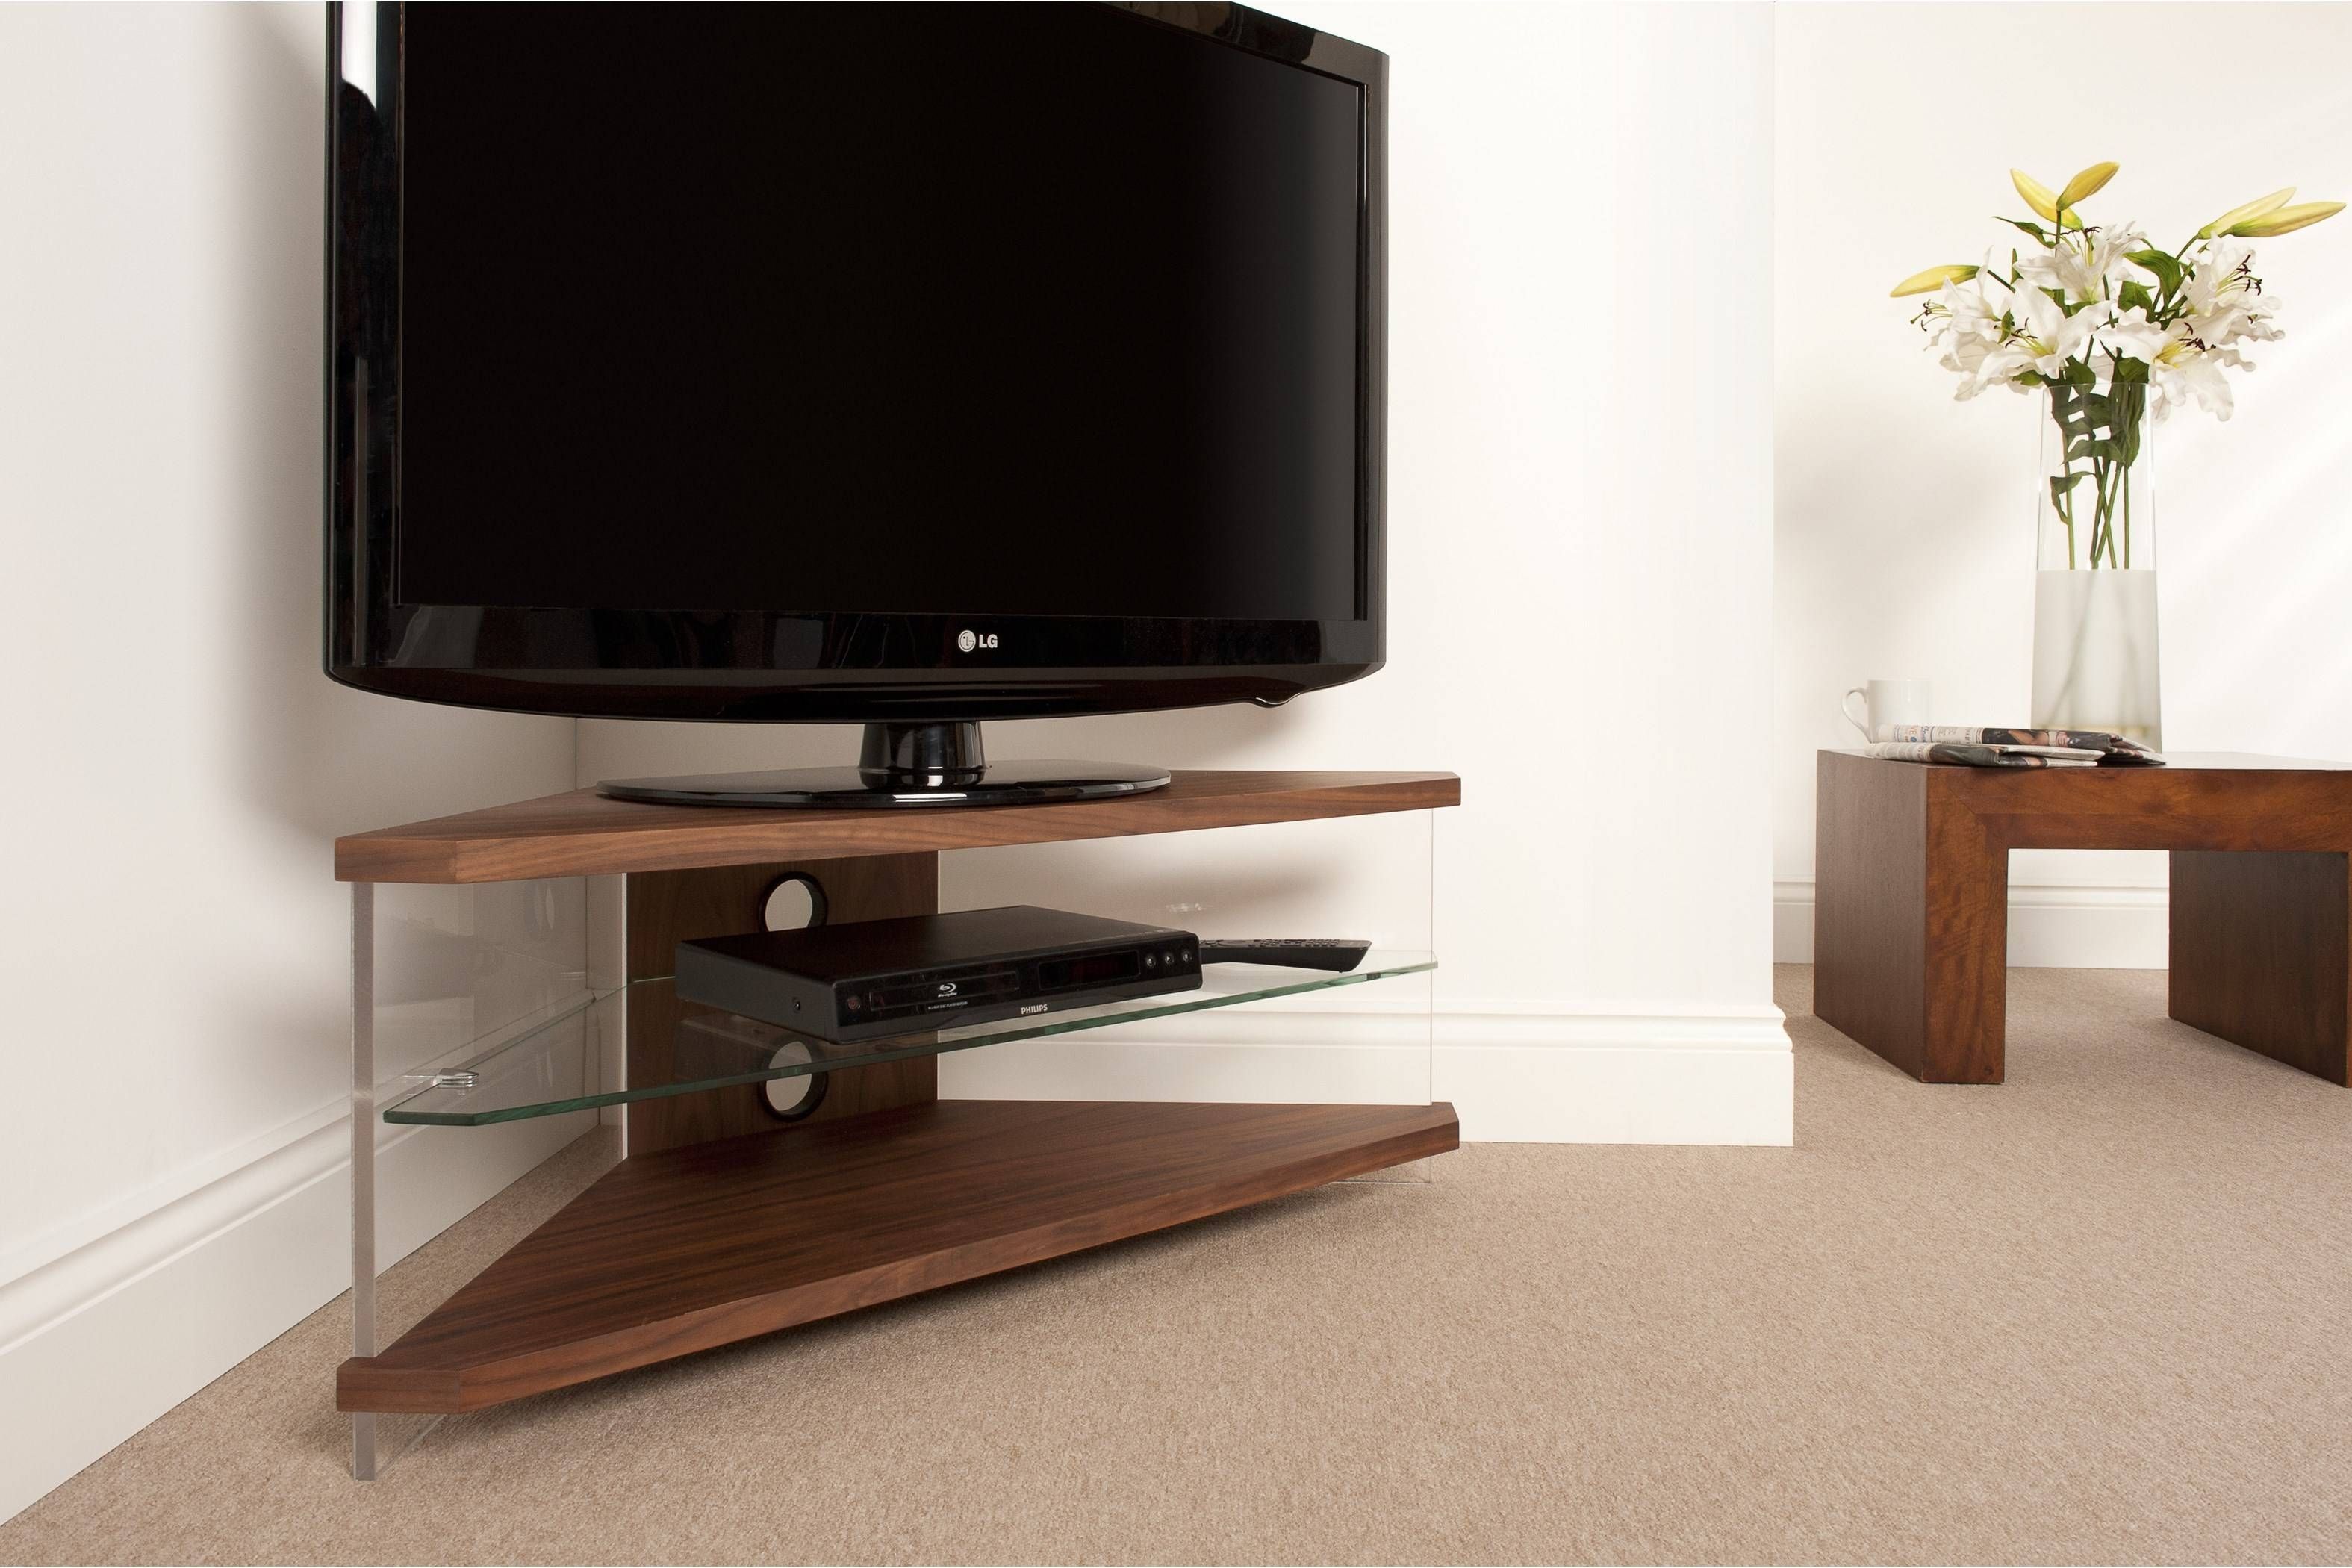 Appalling Glass Furniture Tv Stand Small Room Storage On Glass For Tv Stands For Small Rooms (View 11 of 15)